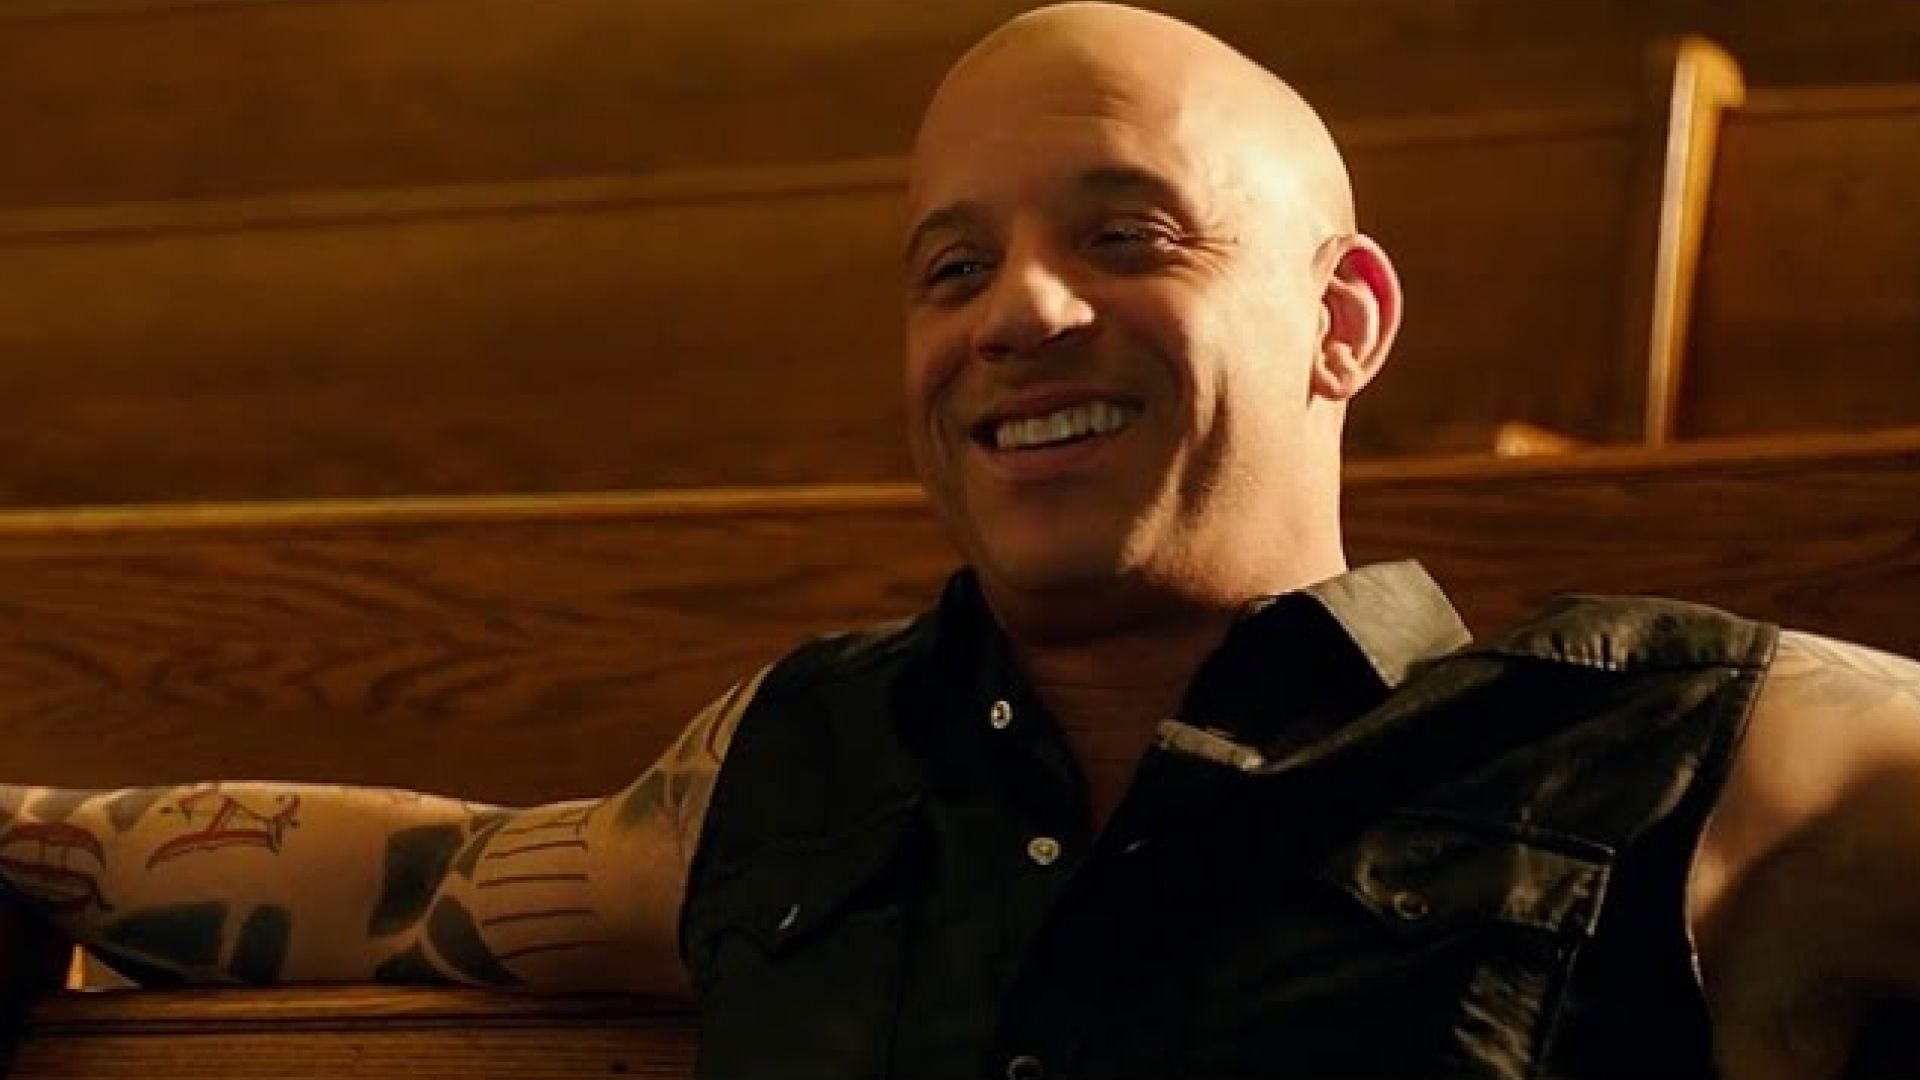 First Official Teaser Trailer for Xxx: Return of Xander Cage